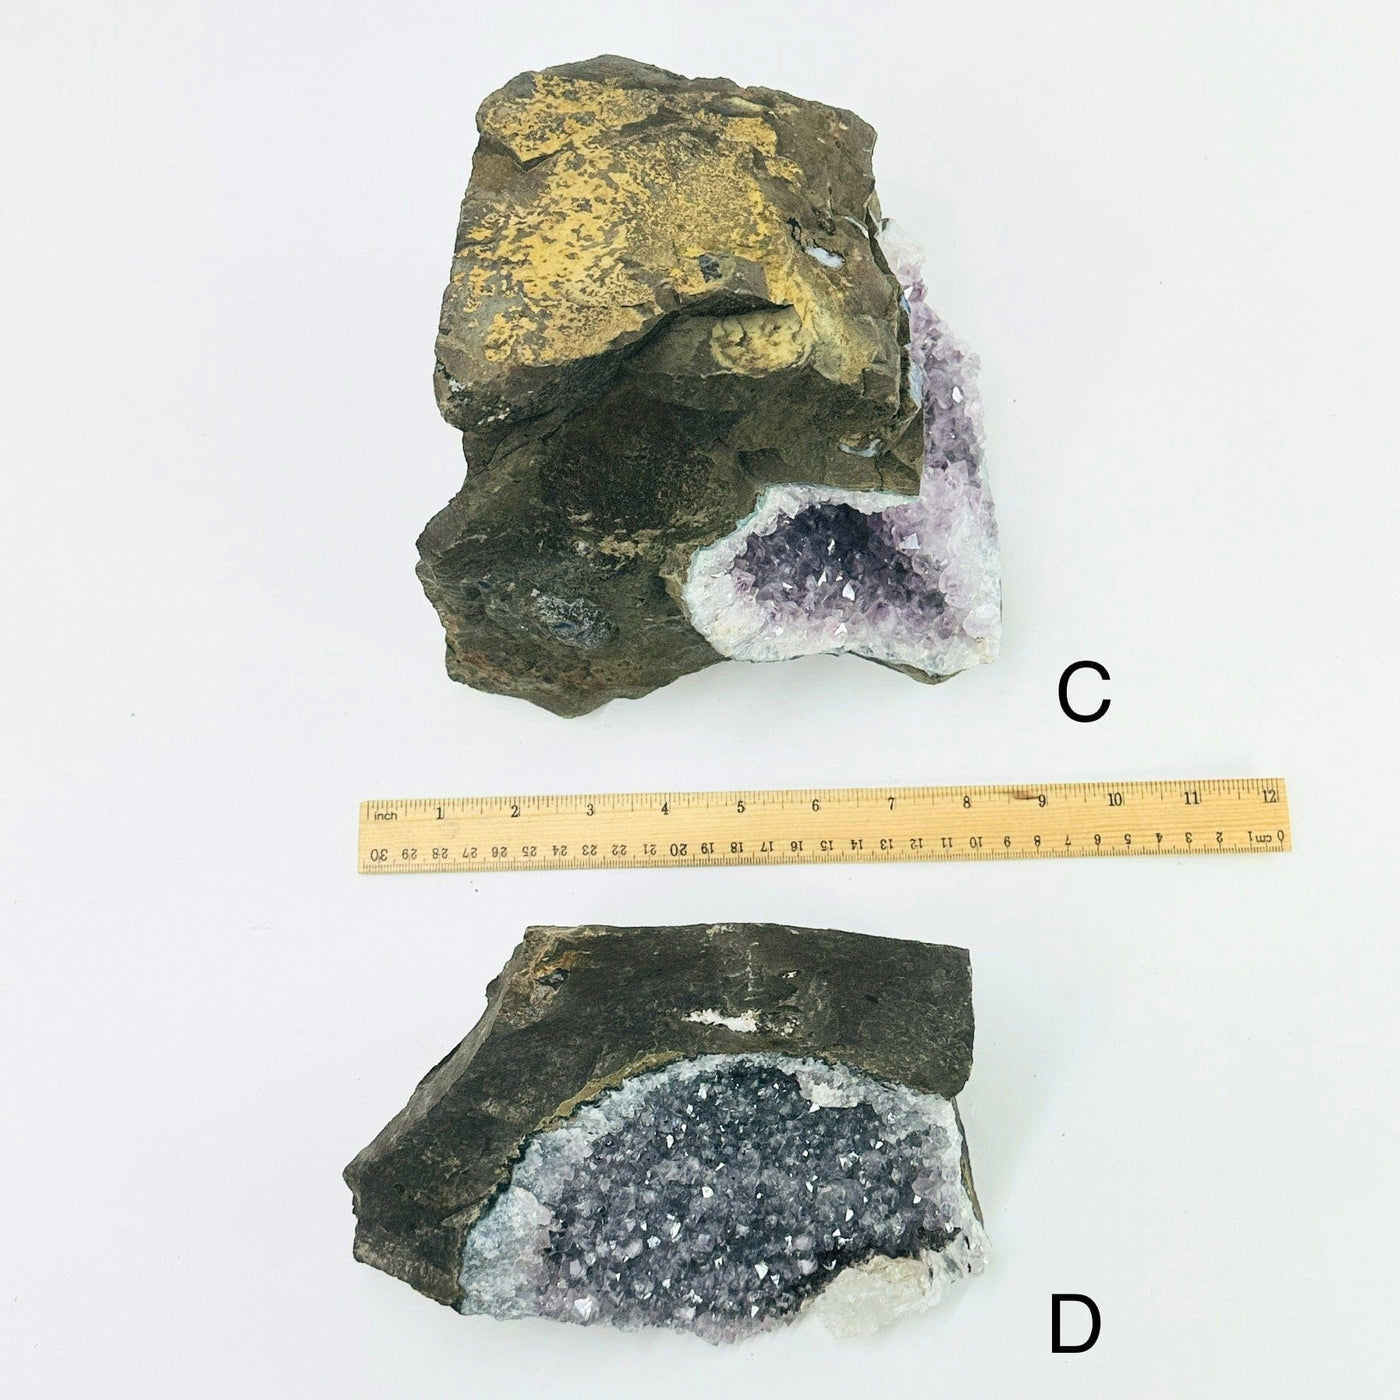  Amethyst Crystal on Matrix - You Choose - Variants C and D with ruler for size reference